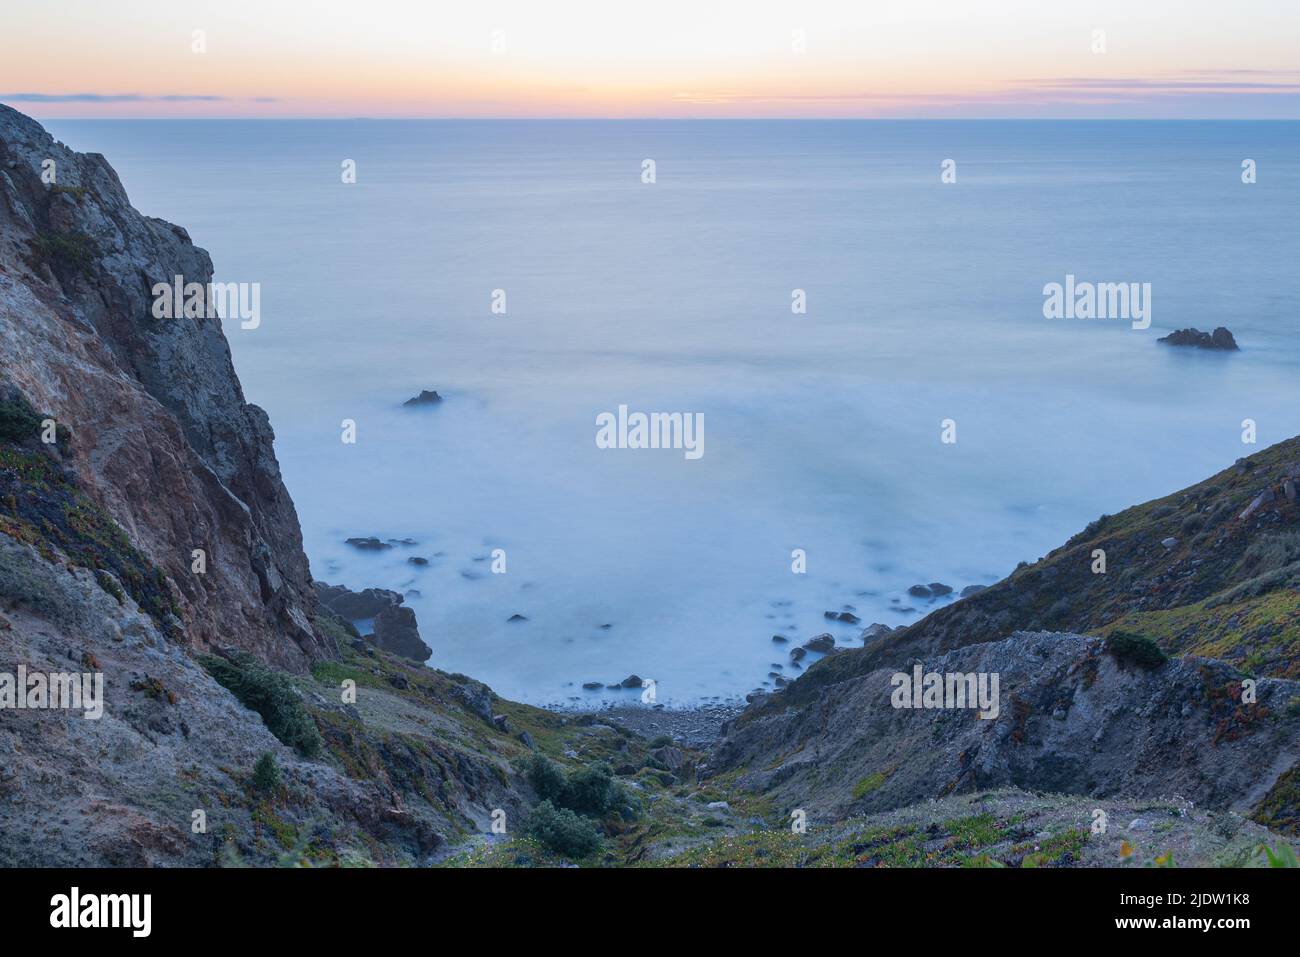 Blurred waves in twilight blue hour sunset long exposure photo of rocky slope leading down to Atlantic Ocean in Sintra-Cascais Natural Park in Portuga Stock Photo